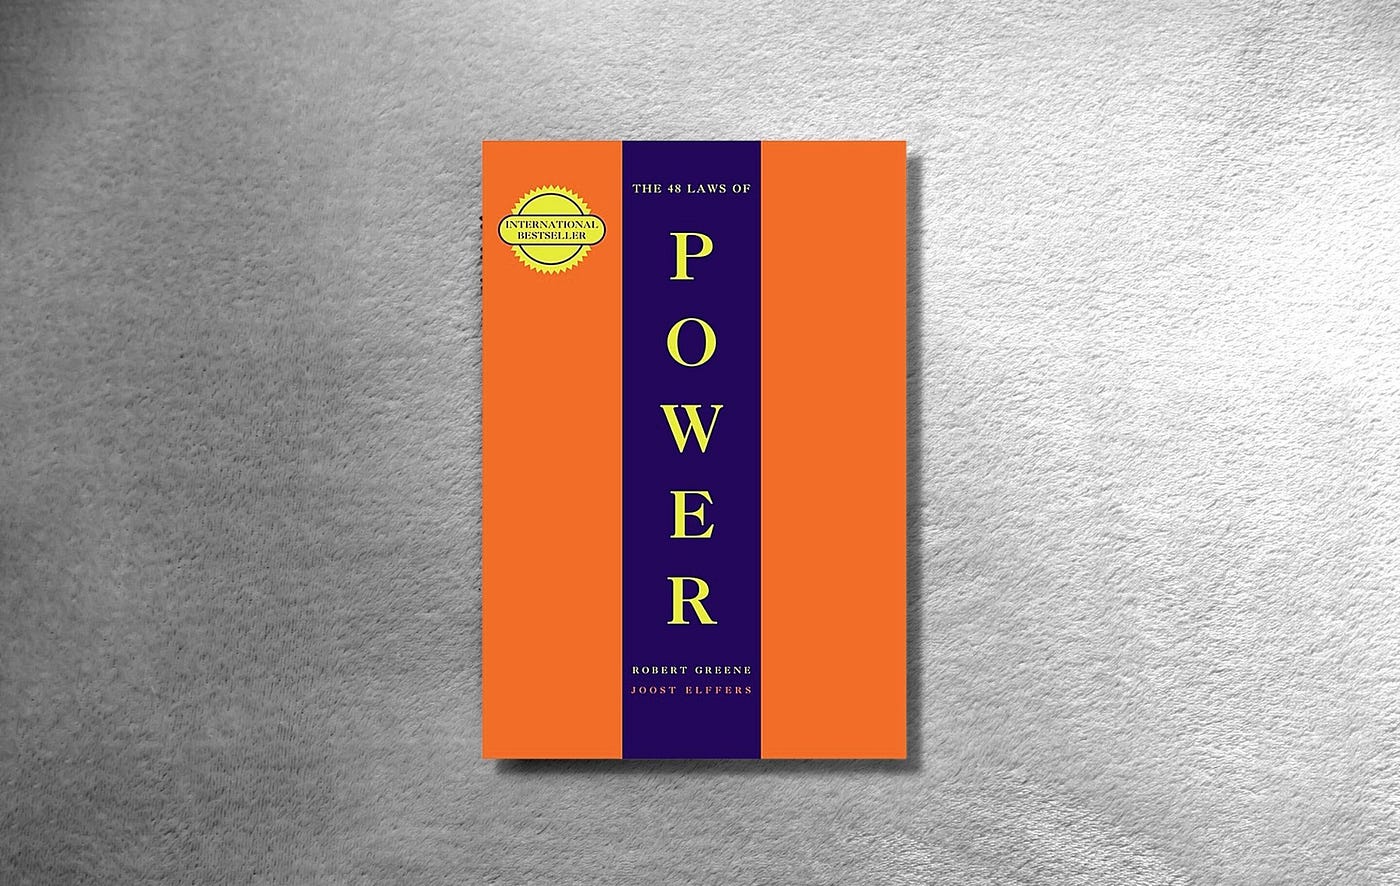 5 Invaluable Lessons From the Book “48 Laws of Power.”